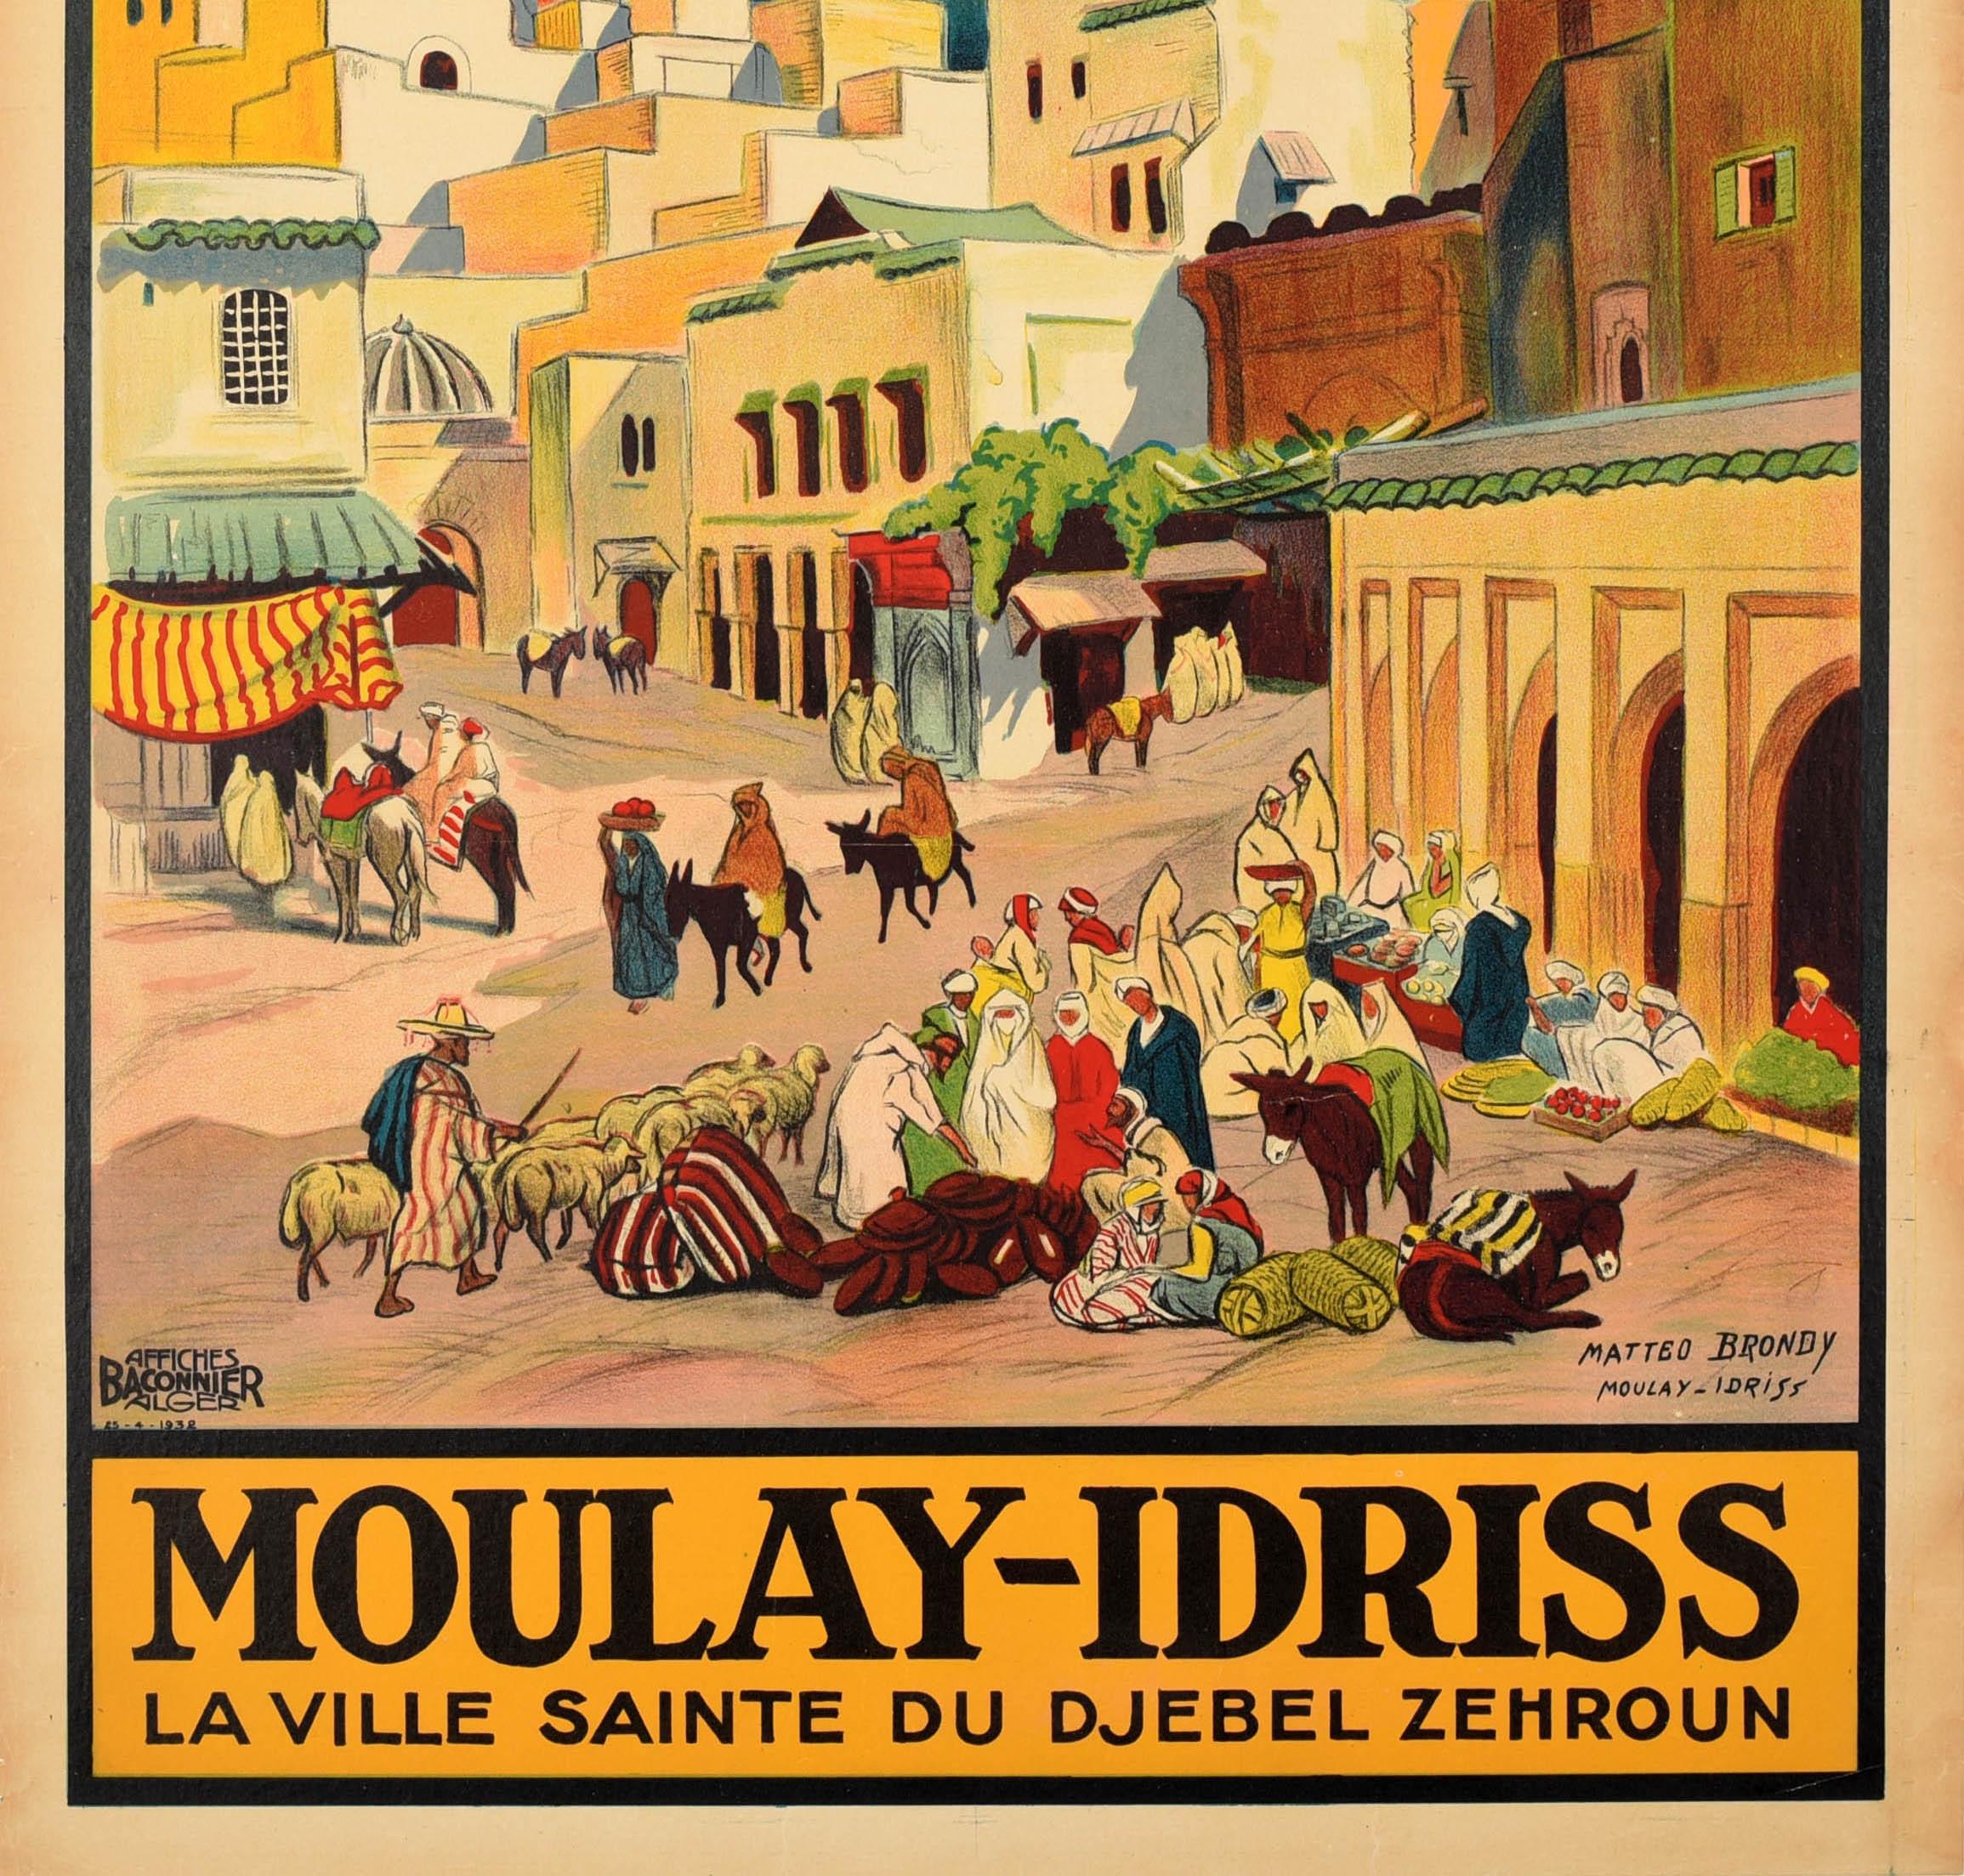 Original vintage travel poster issued by the PLM Paris Lyon Mediterranee railway for Moulay Idriss The Holy City Of Djebel Zerhoun featuring a colourful view of people walking along the hill town streets with a man shepherding a flock of sheep by a